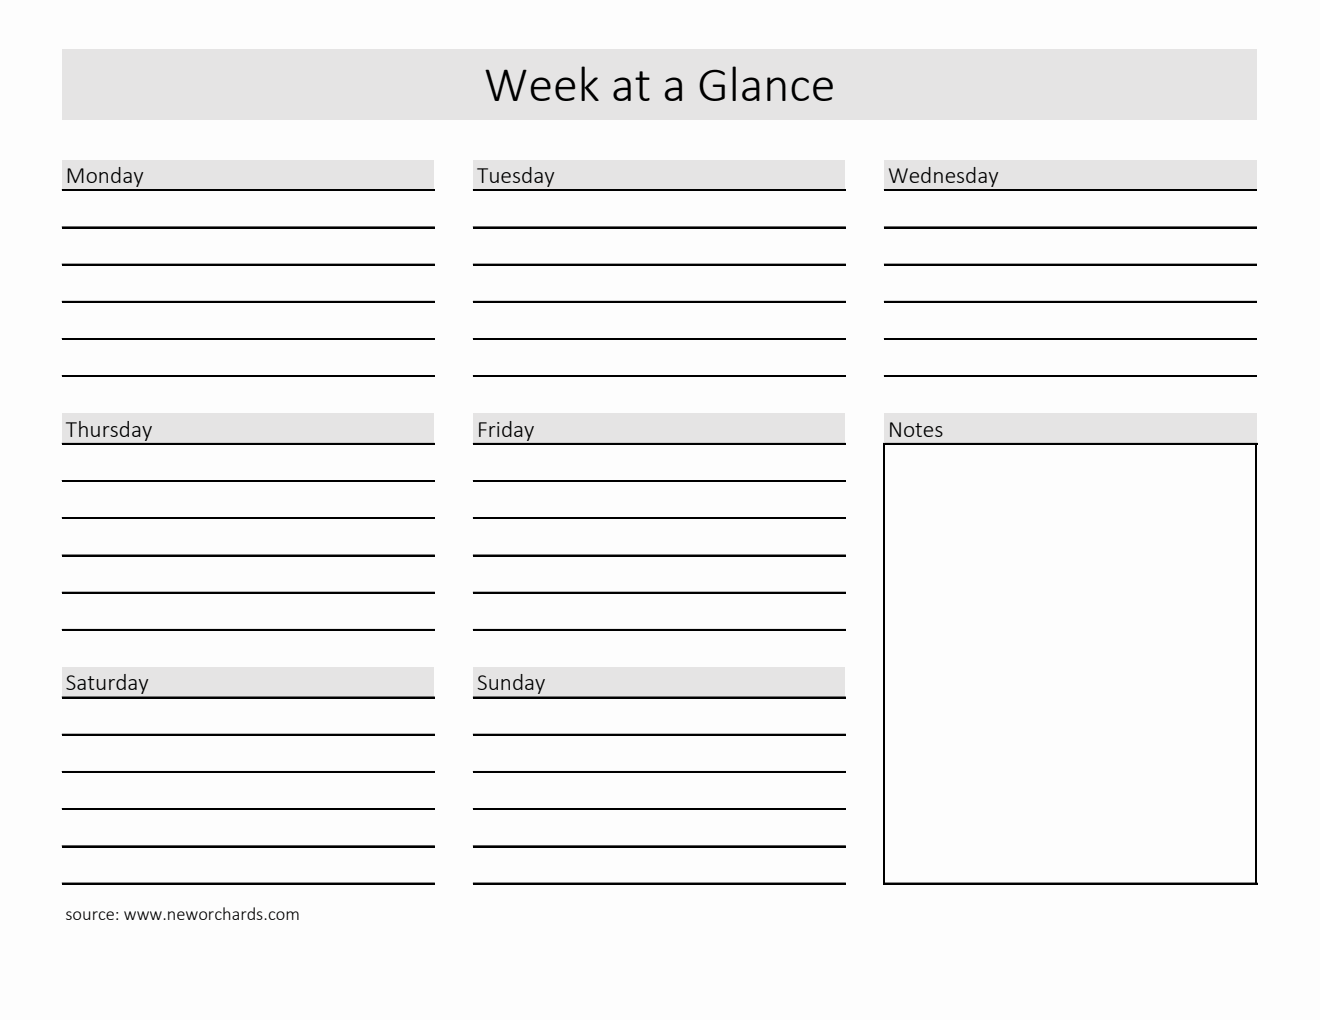 Blank Week at a Glance Template (Excel)